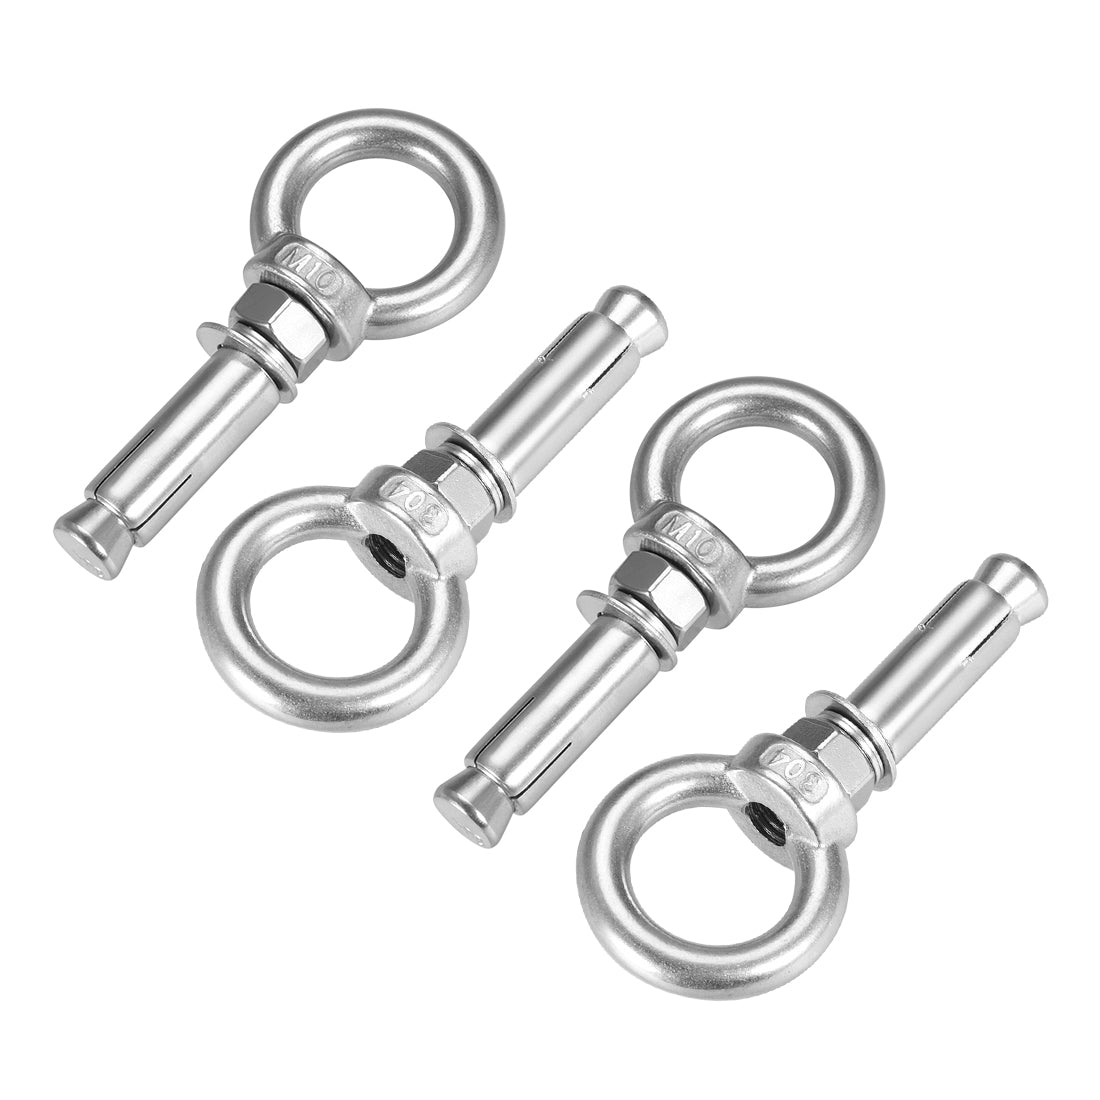 uxcell Uxcell M10 x 60 Expansion Eyebolt Eye Nut Screw with Ring Anchor Raw Bolts 4 Pcs